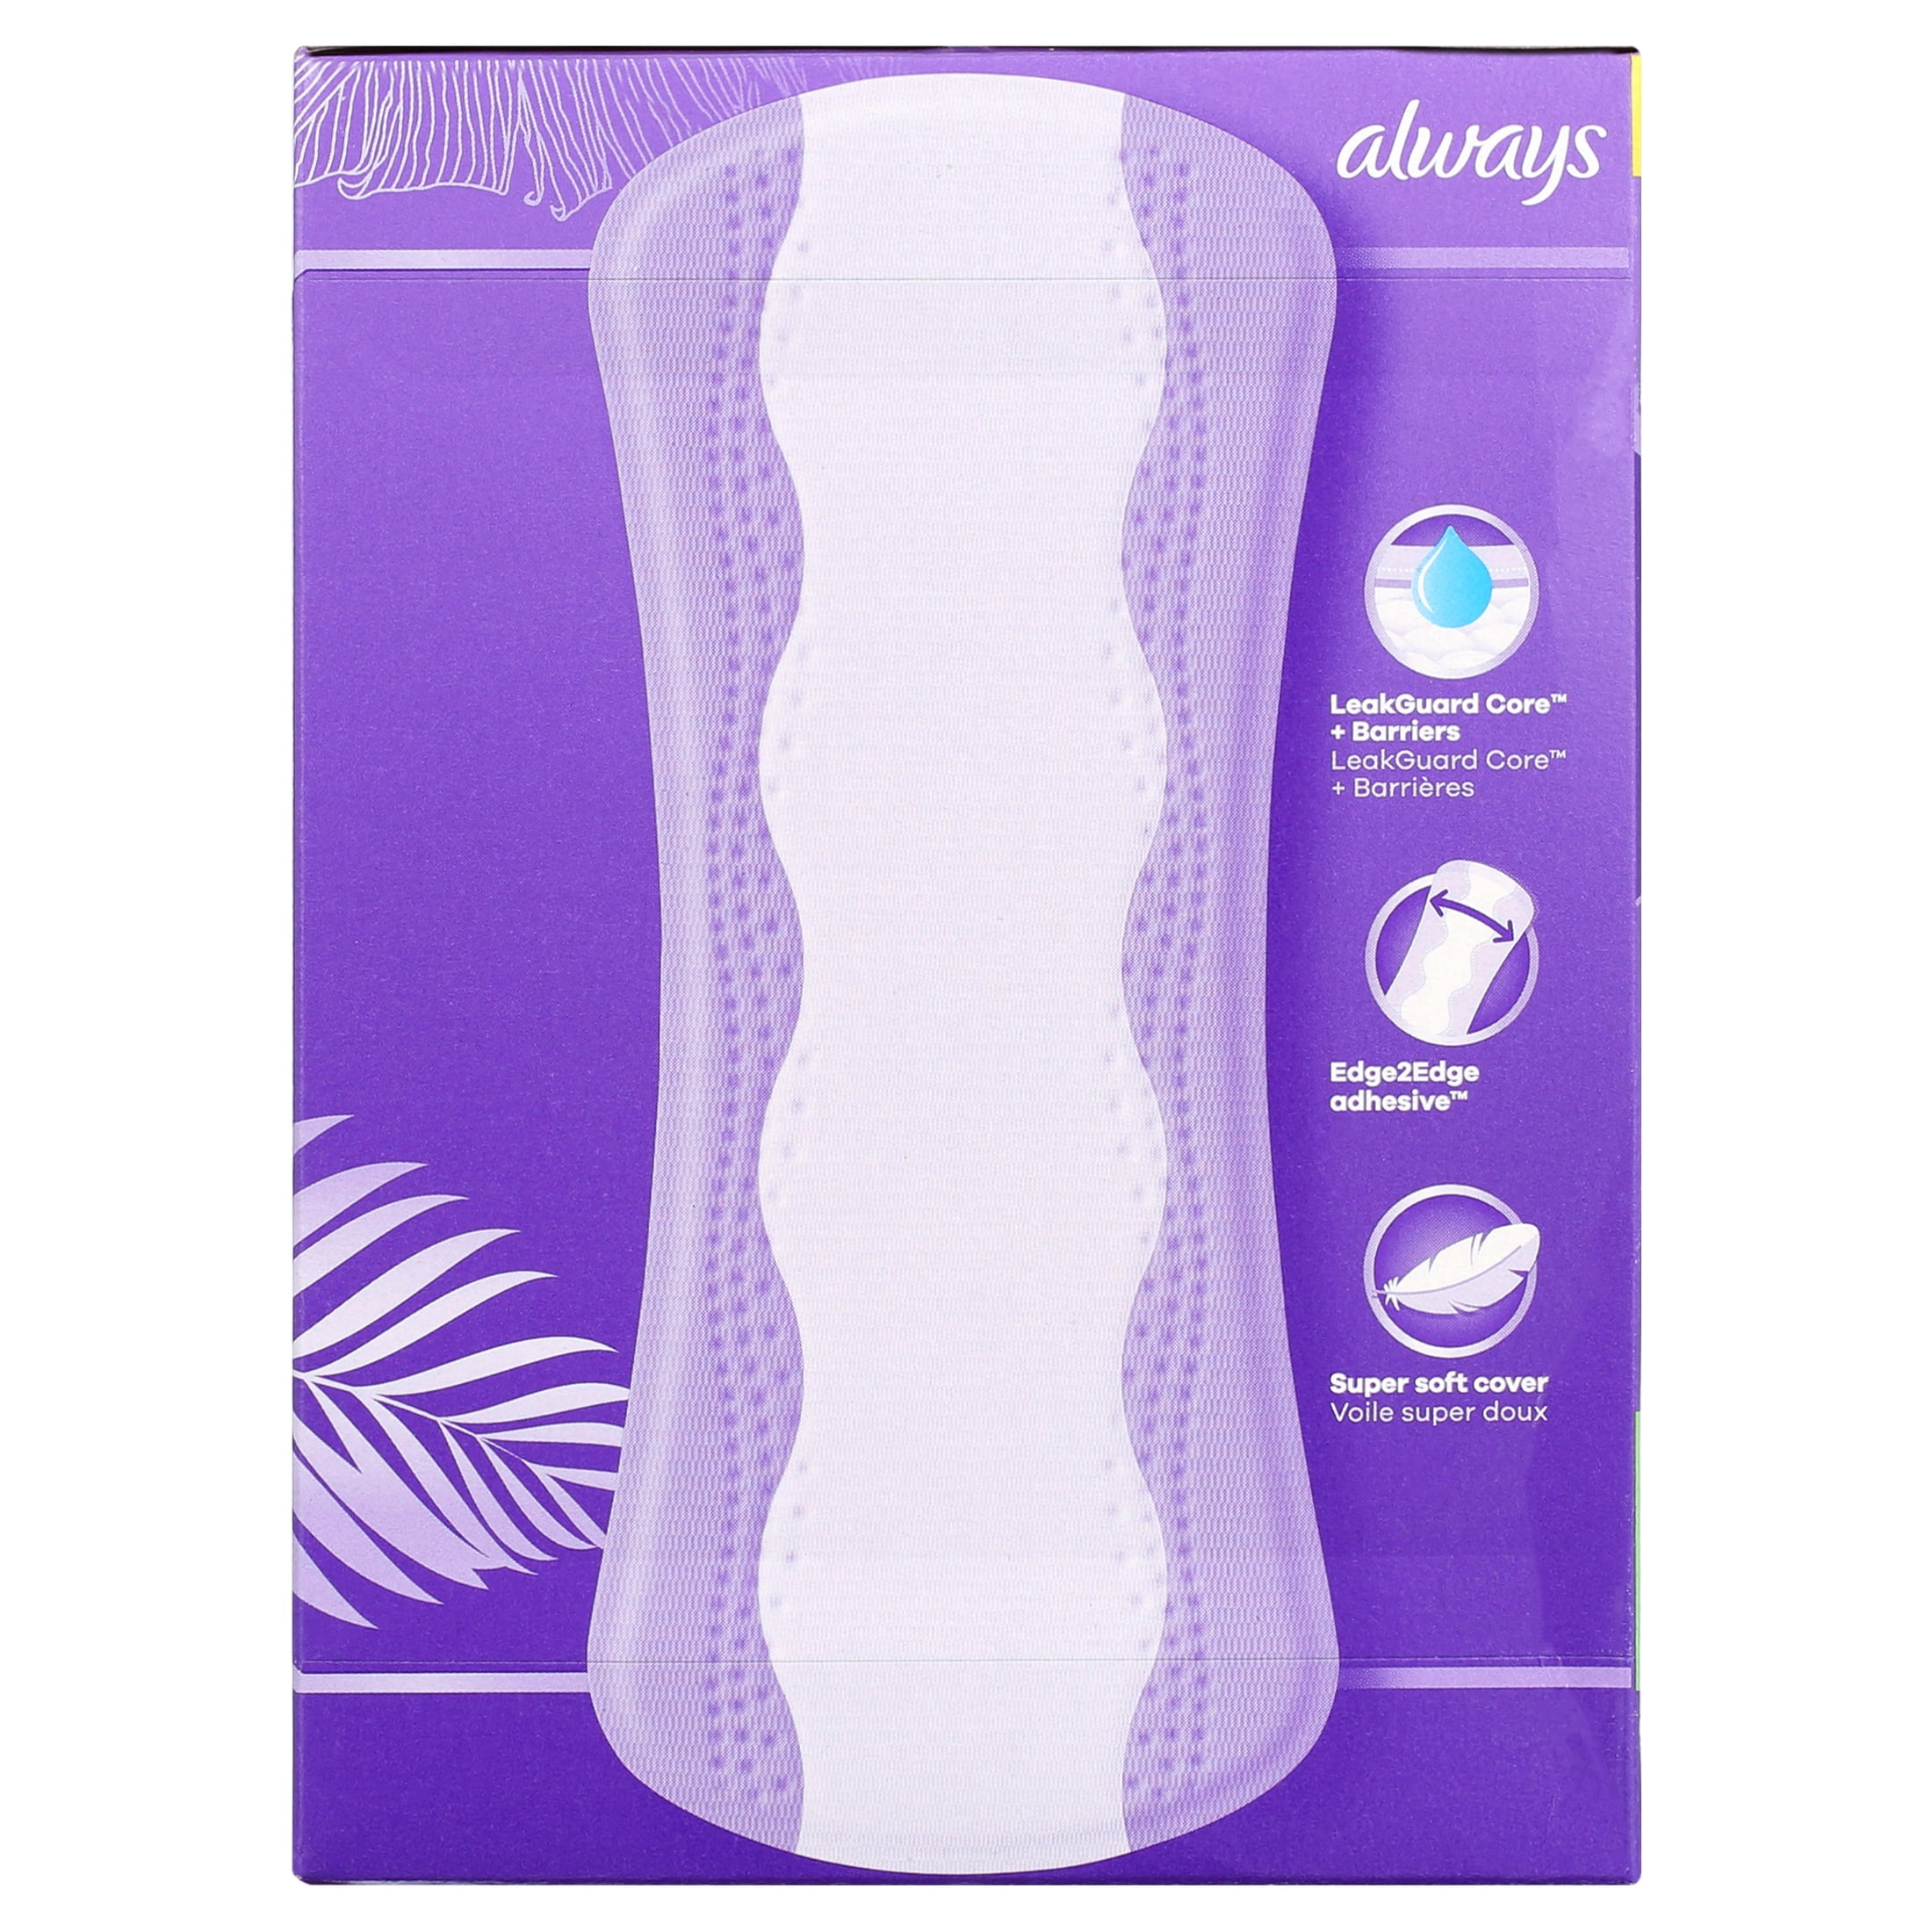 Beyond Protection: Discovering The Suprising uses of Panty liners